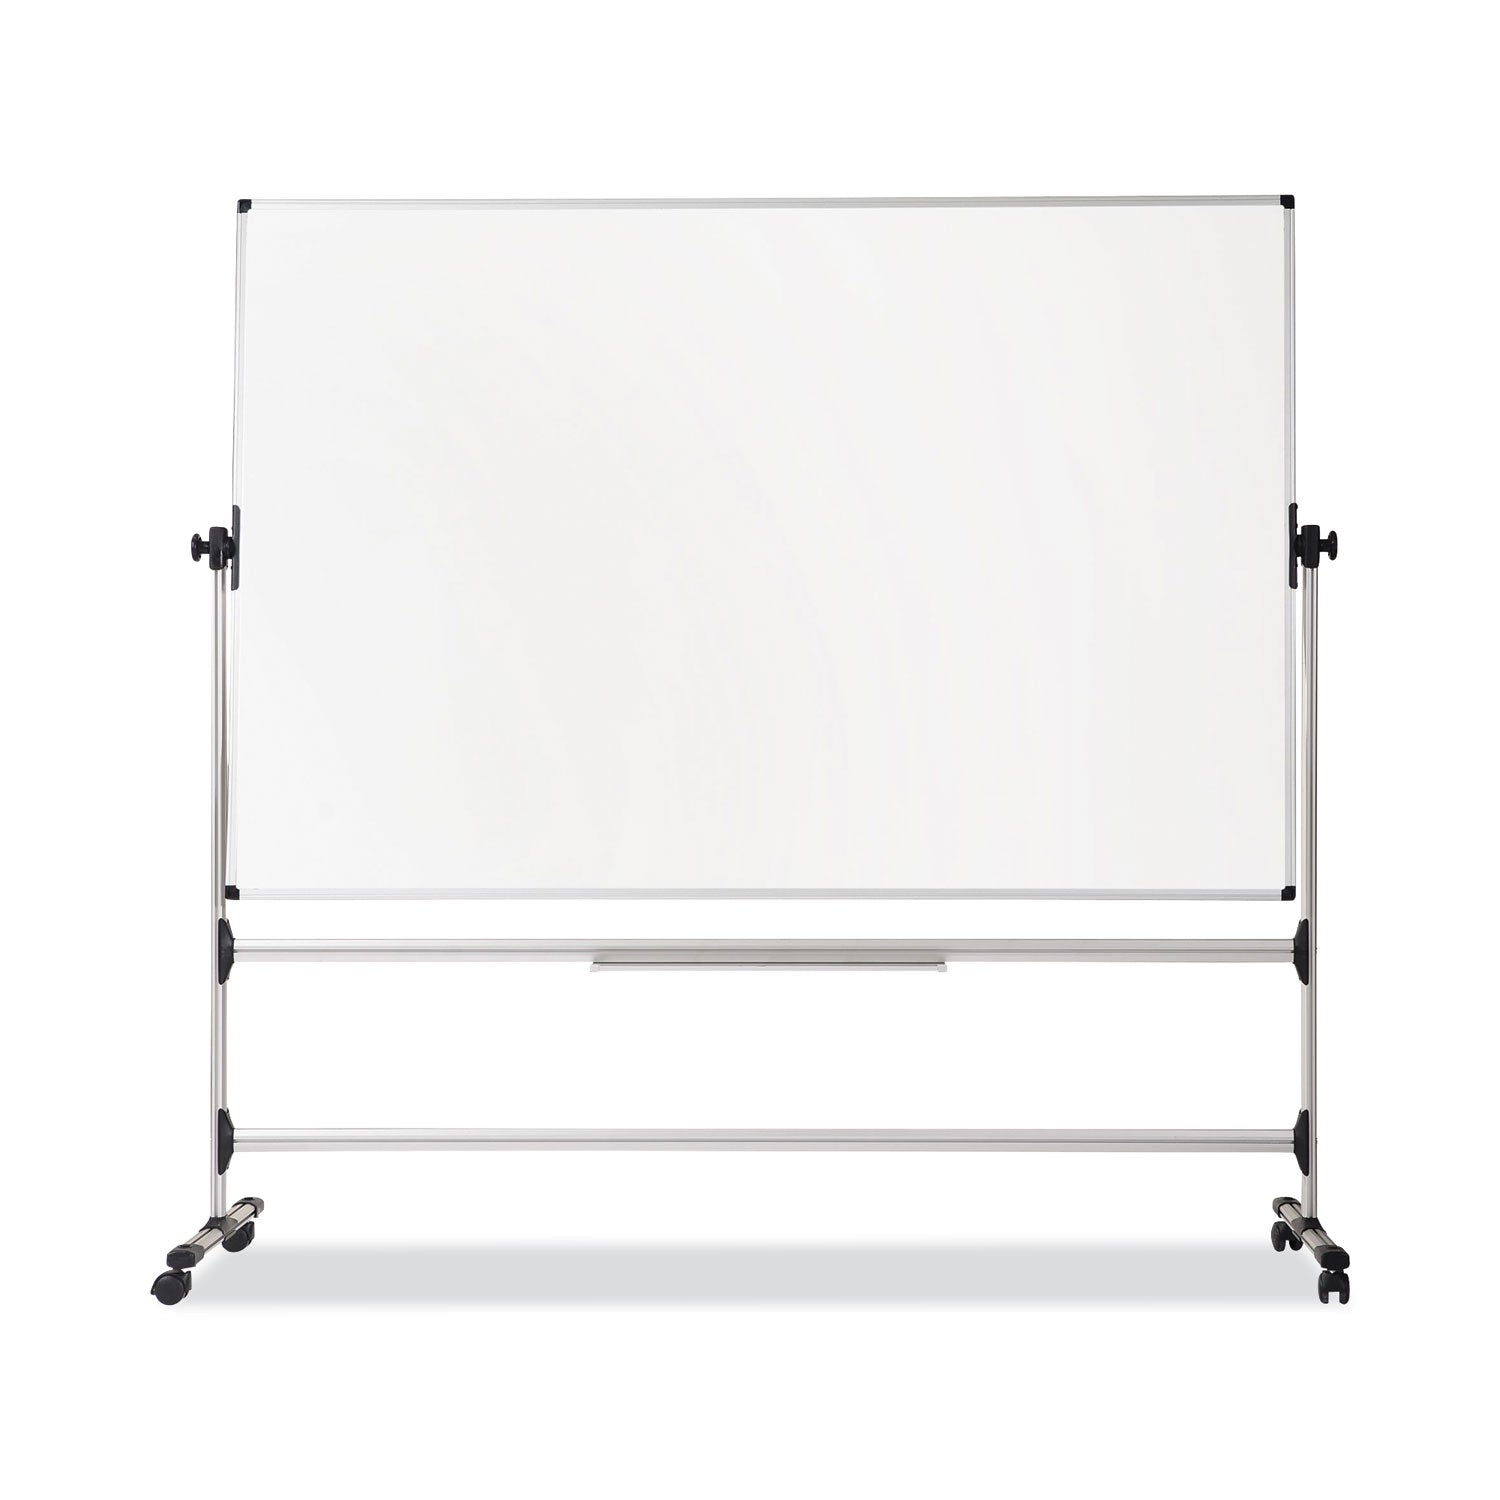 earth-silver-easy-clean-mobile-revolver-dry-erase-boards-36-x-48-white-surface-silver-steel-frame_bvcrqr0221 - 1